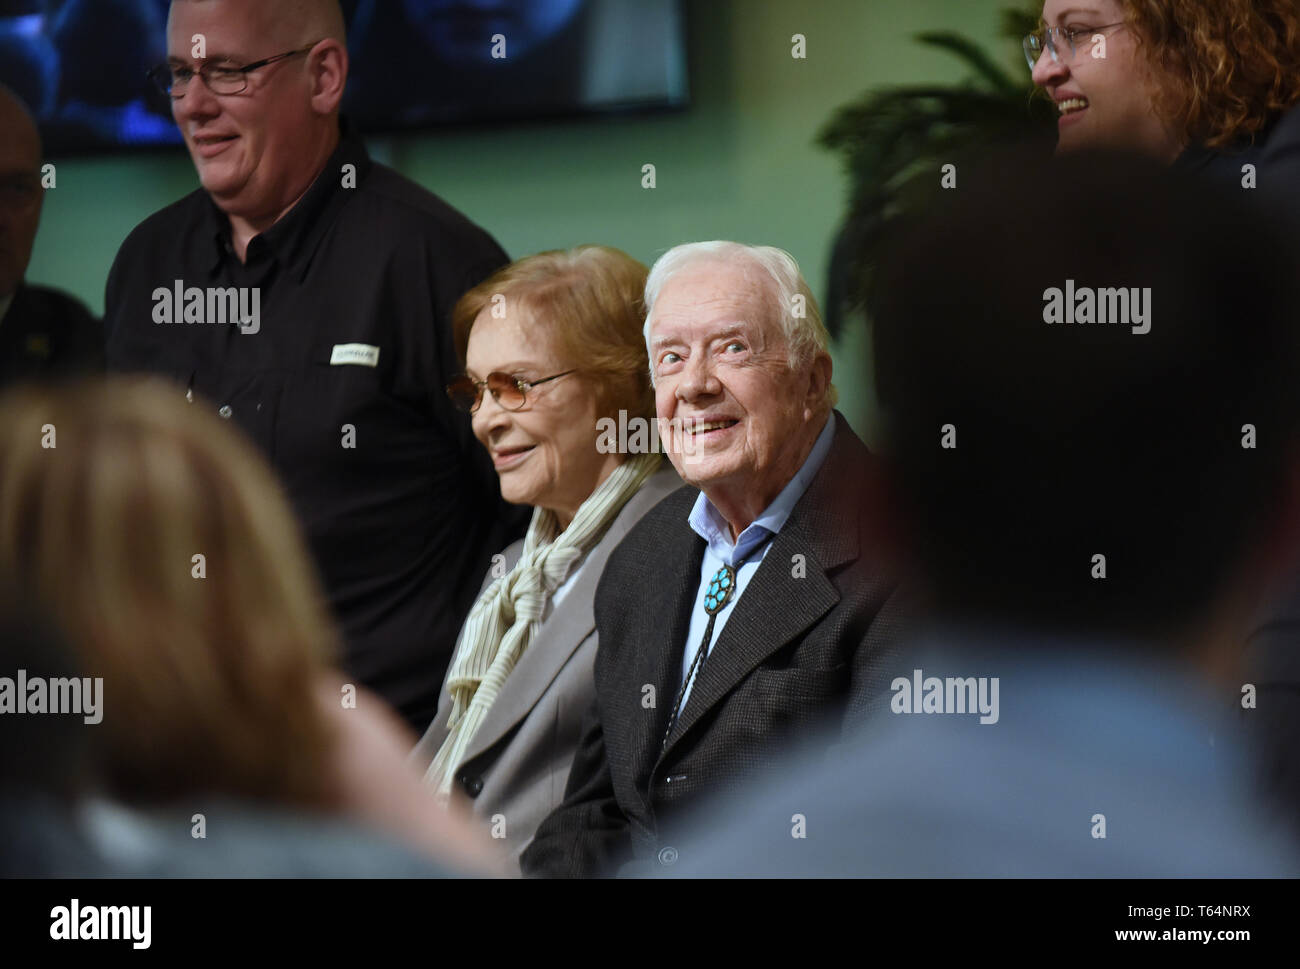 Plains, Georgia, USA. 28th Apr 2019. Former U.S. President Jimmy Carter and his wife, Rosalynn Carter, pose for a photograph with church attendees at Maranatha Baptist Church after Carter taught Sunday school in his hometown of Plains, Georgia on April 28, 2019. Carter, 94, has taught Sunday school at the church on a regular basis since leaving the White House in 1981, drawing hundreds of visitors who arrive hours before the 10:00 am lesson in order to get a seat and have a photograph taken with the former President and former First Lady Rosalynn Carter. Credit: Paul Hennessy/Alamy Live News Stock Photo